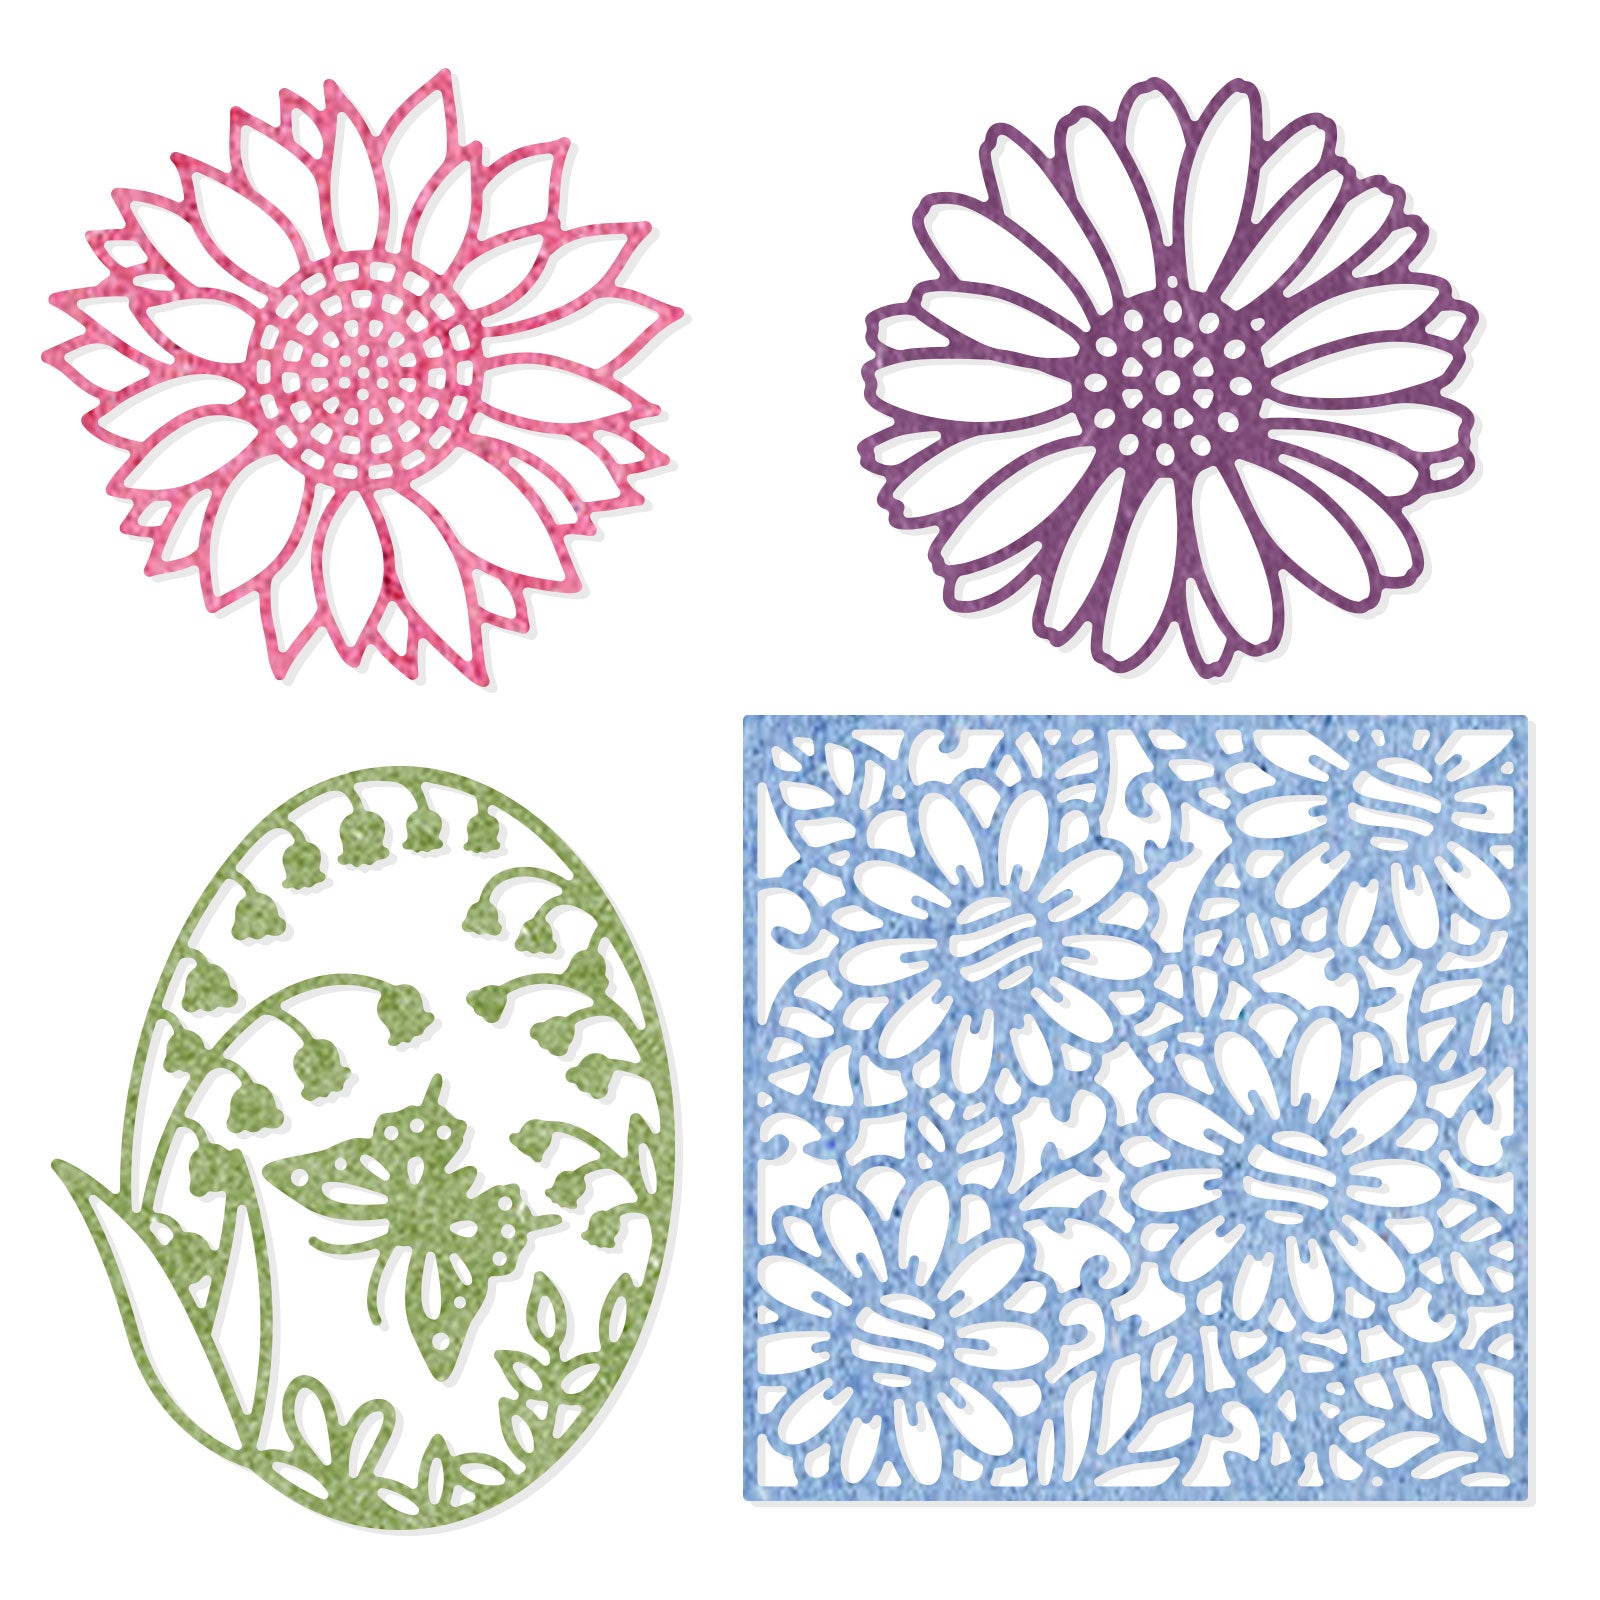 Globleland daisies, sunflowers, lily of the valley, frame Carbon Steel Cutting Dies Stencils, for DIY Scrapbooking/Photo Album, Decorative Embossing DIY Paper Card